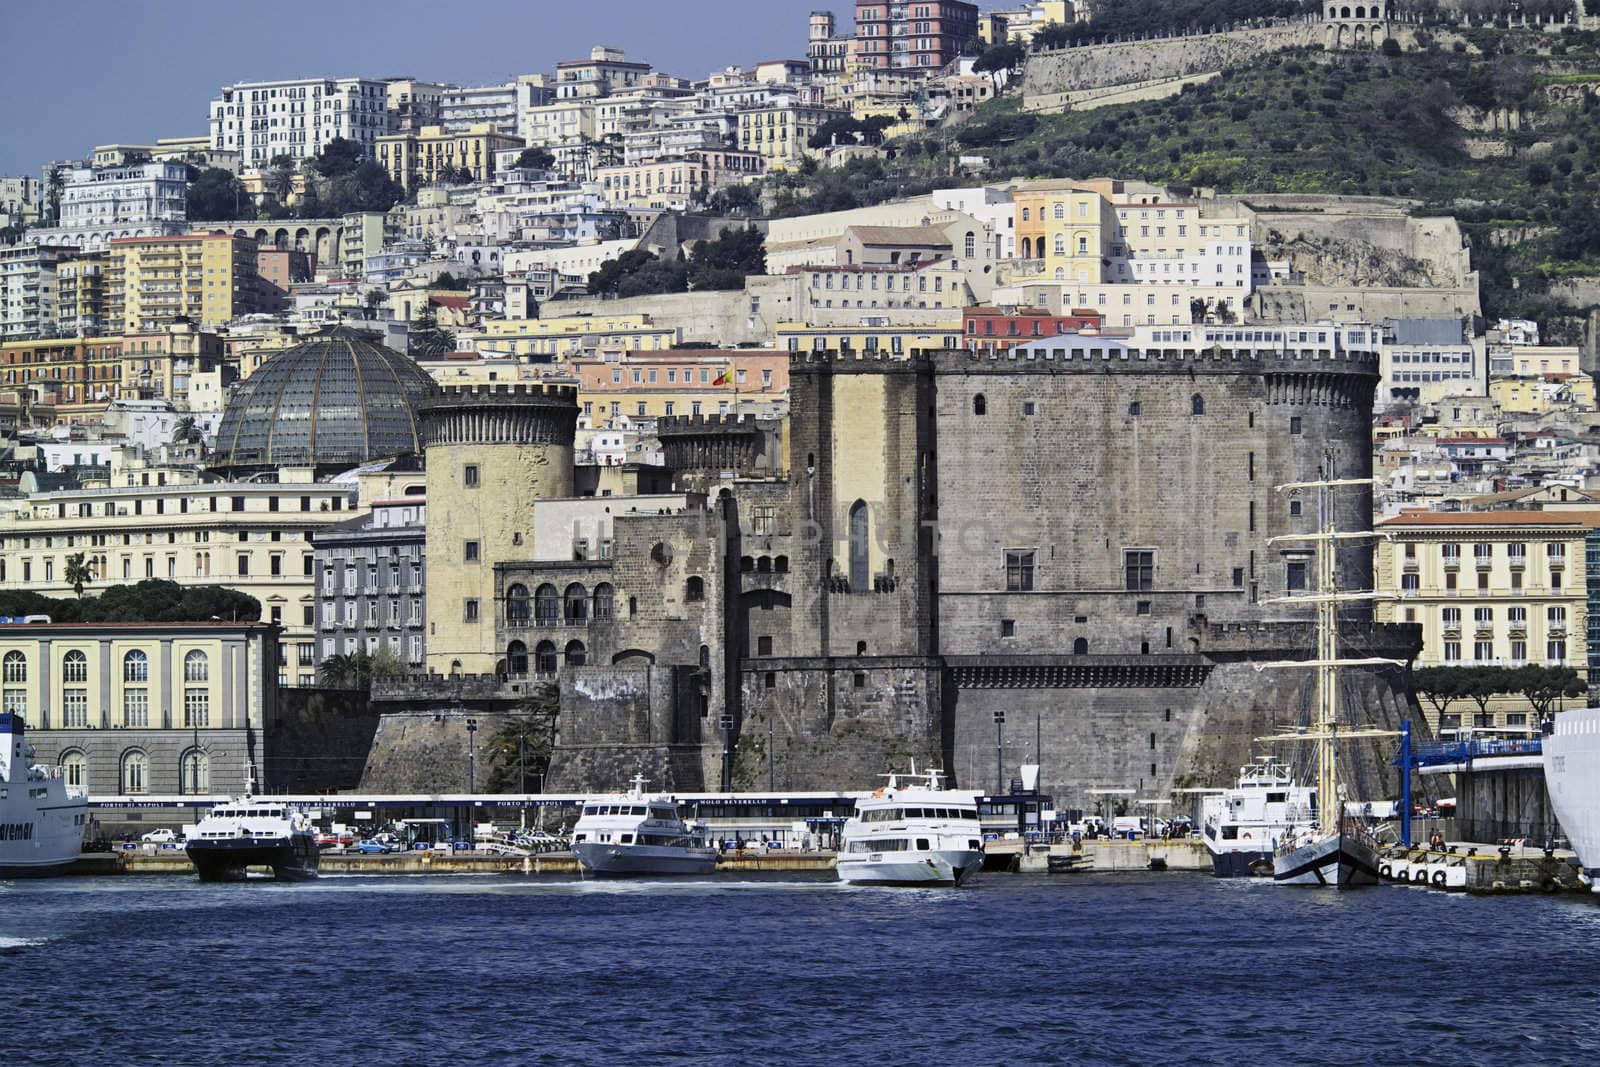 ITALY, Campania, Naples, view of the city, the port and Castel Dell'Ovo from the sea